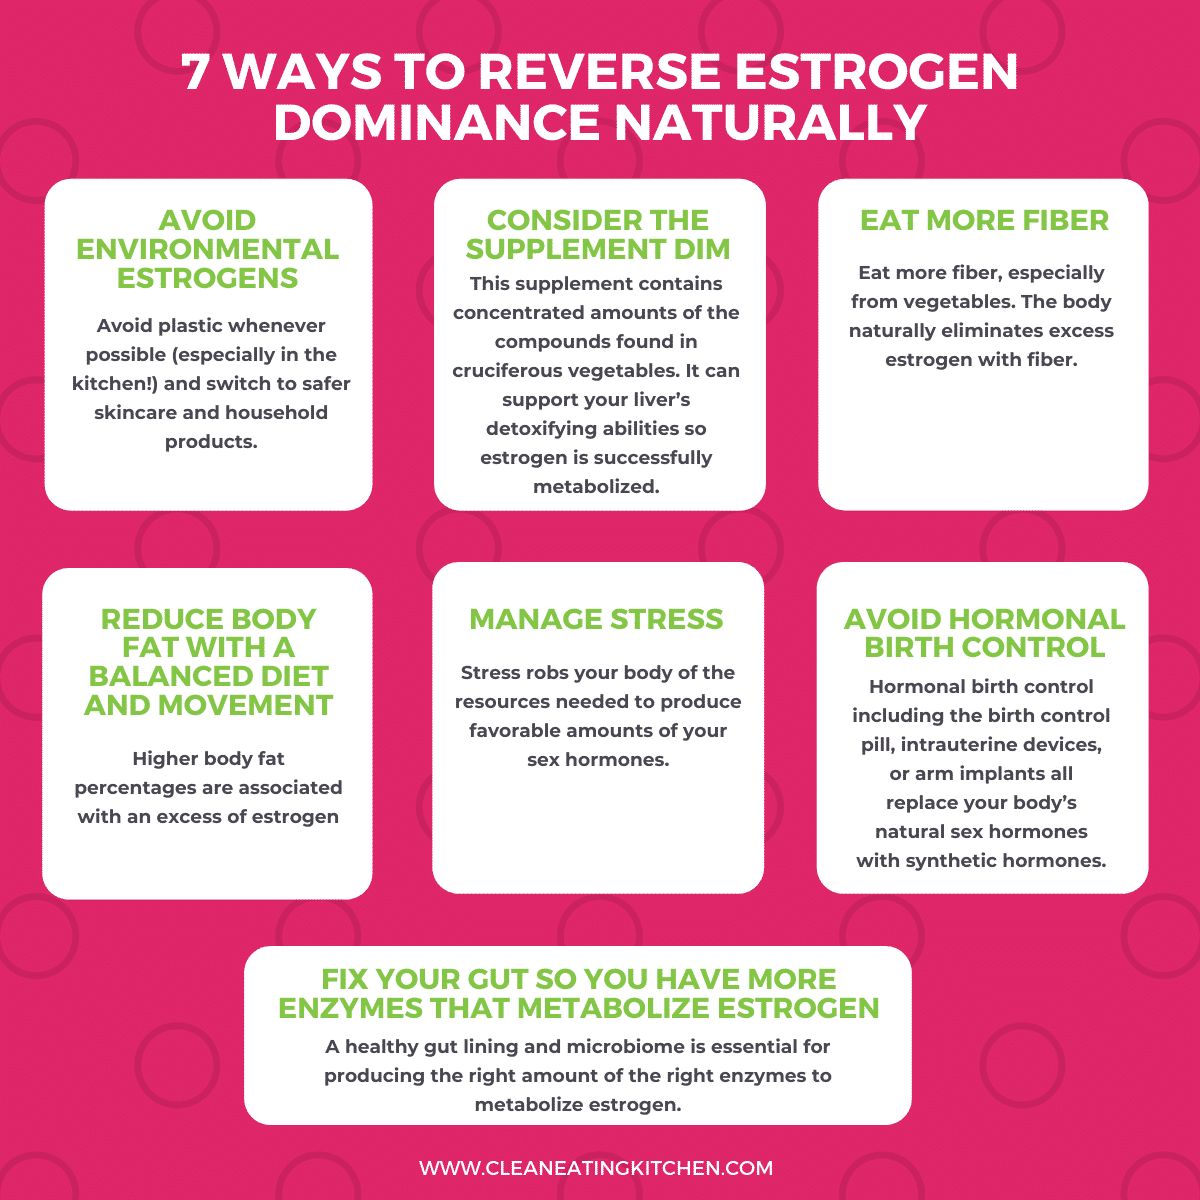 infographic on 7 ways to reverse estrogen dominance naturally